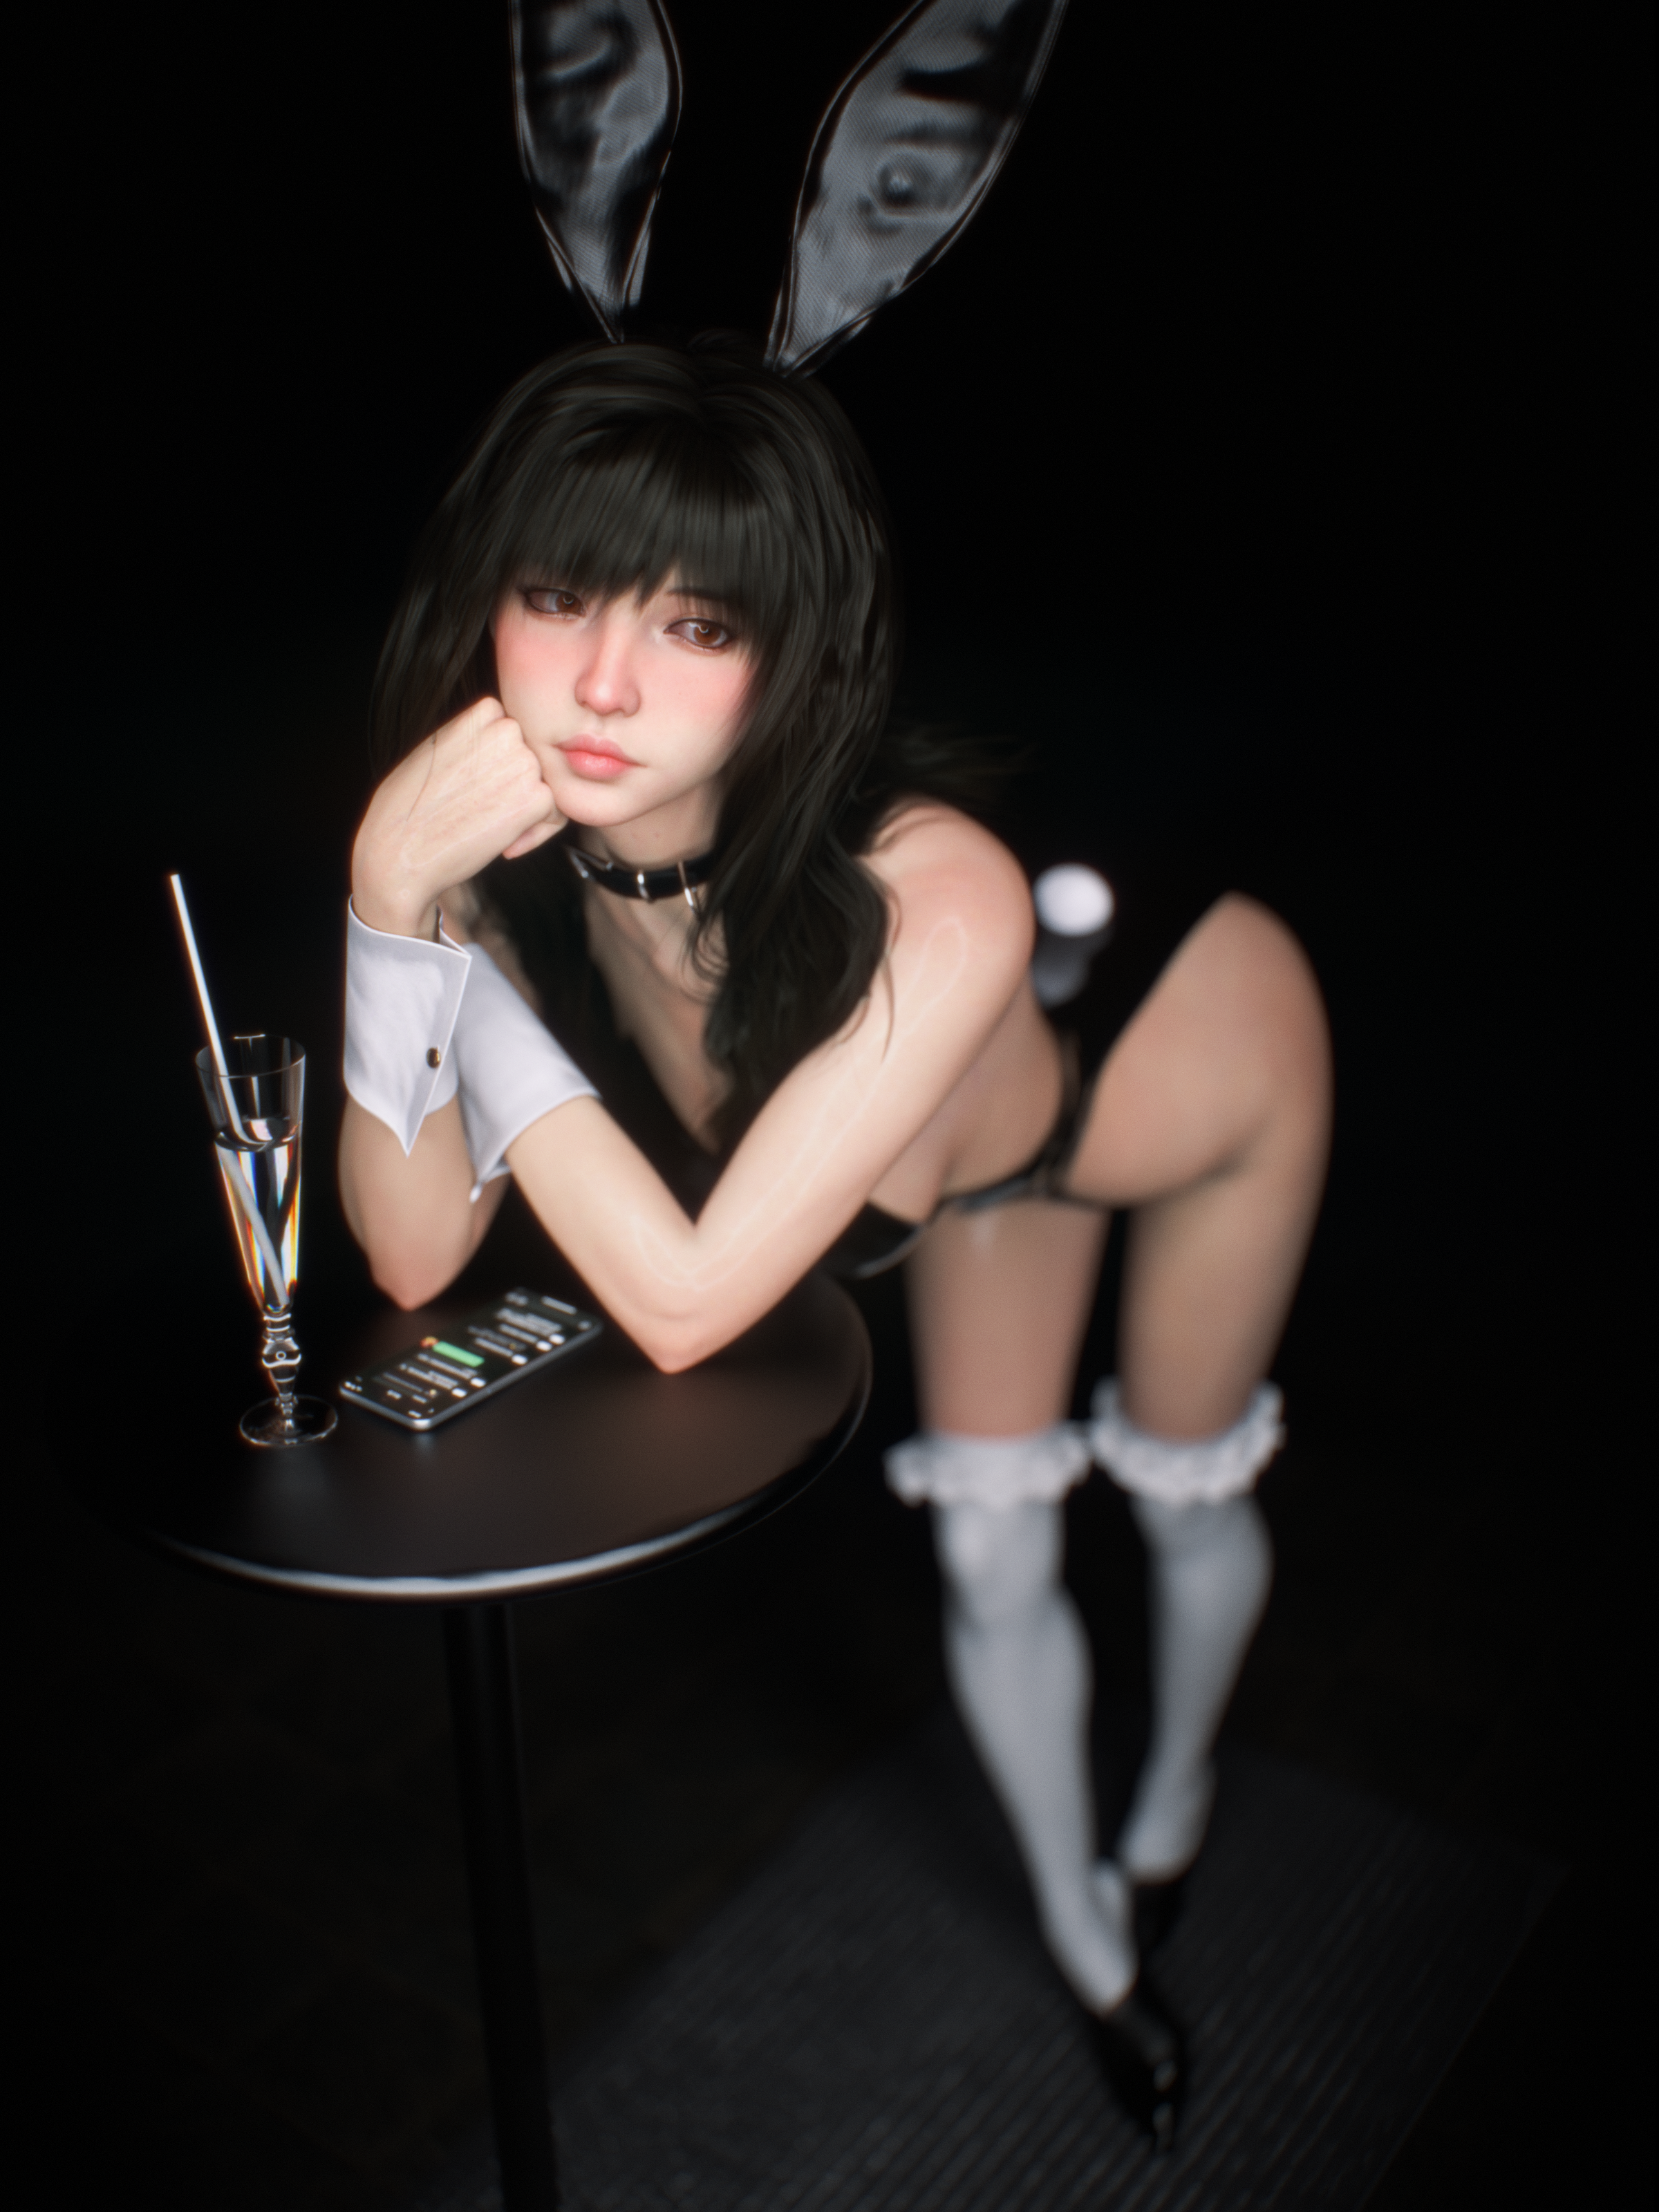 General 2400x3200 Shoe Lac3 3dx Blender bent over bunny suit bunny ears bunny tail choker black background simple background black hair women